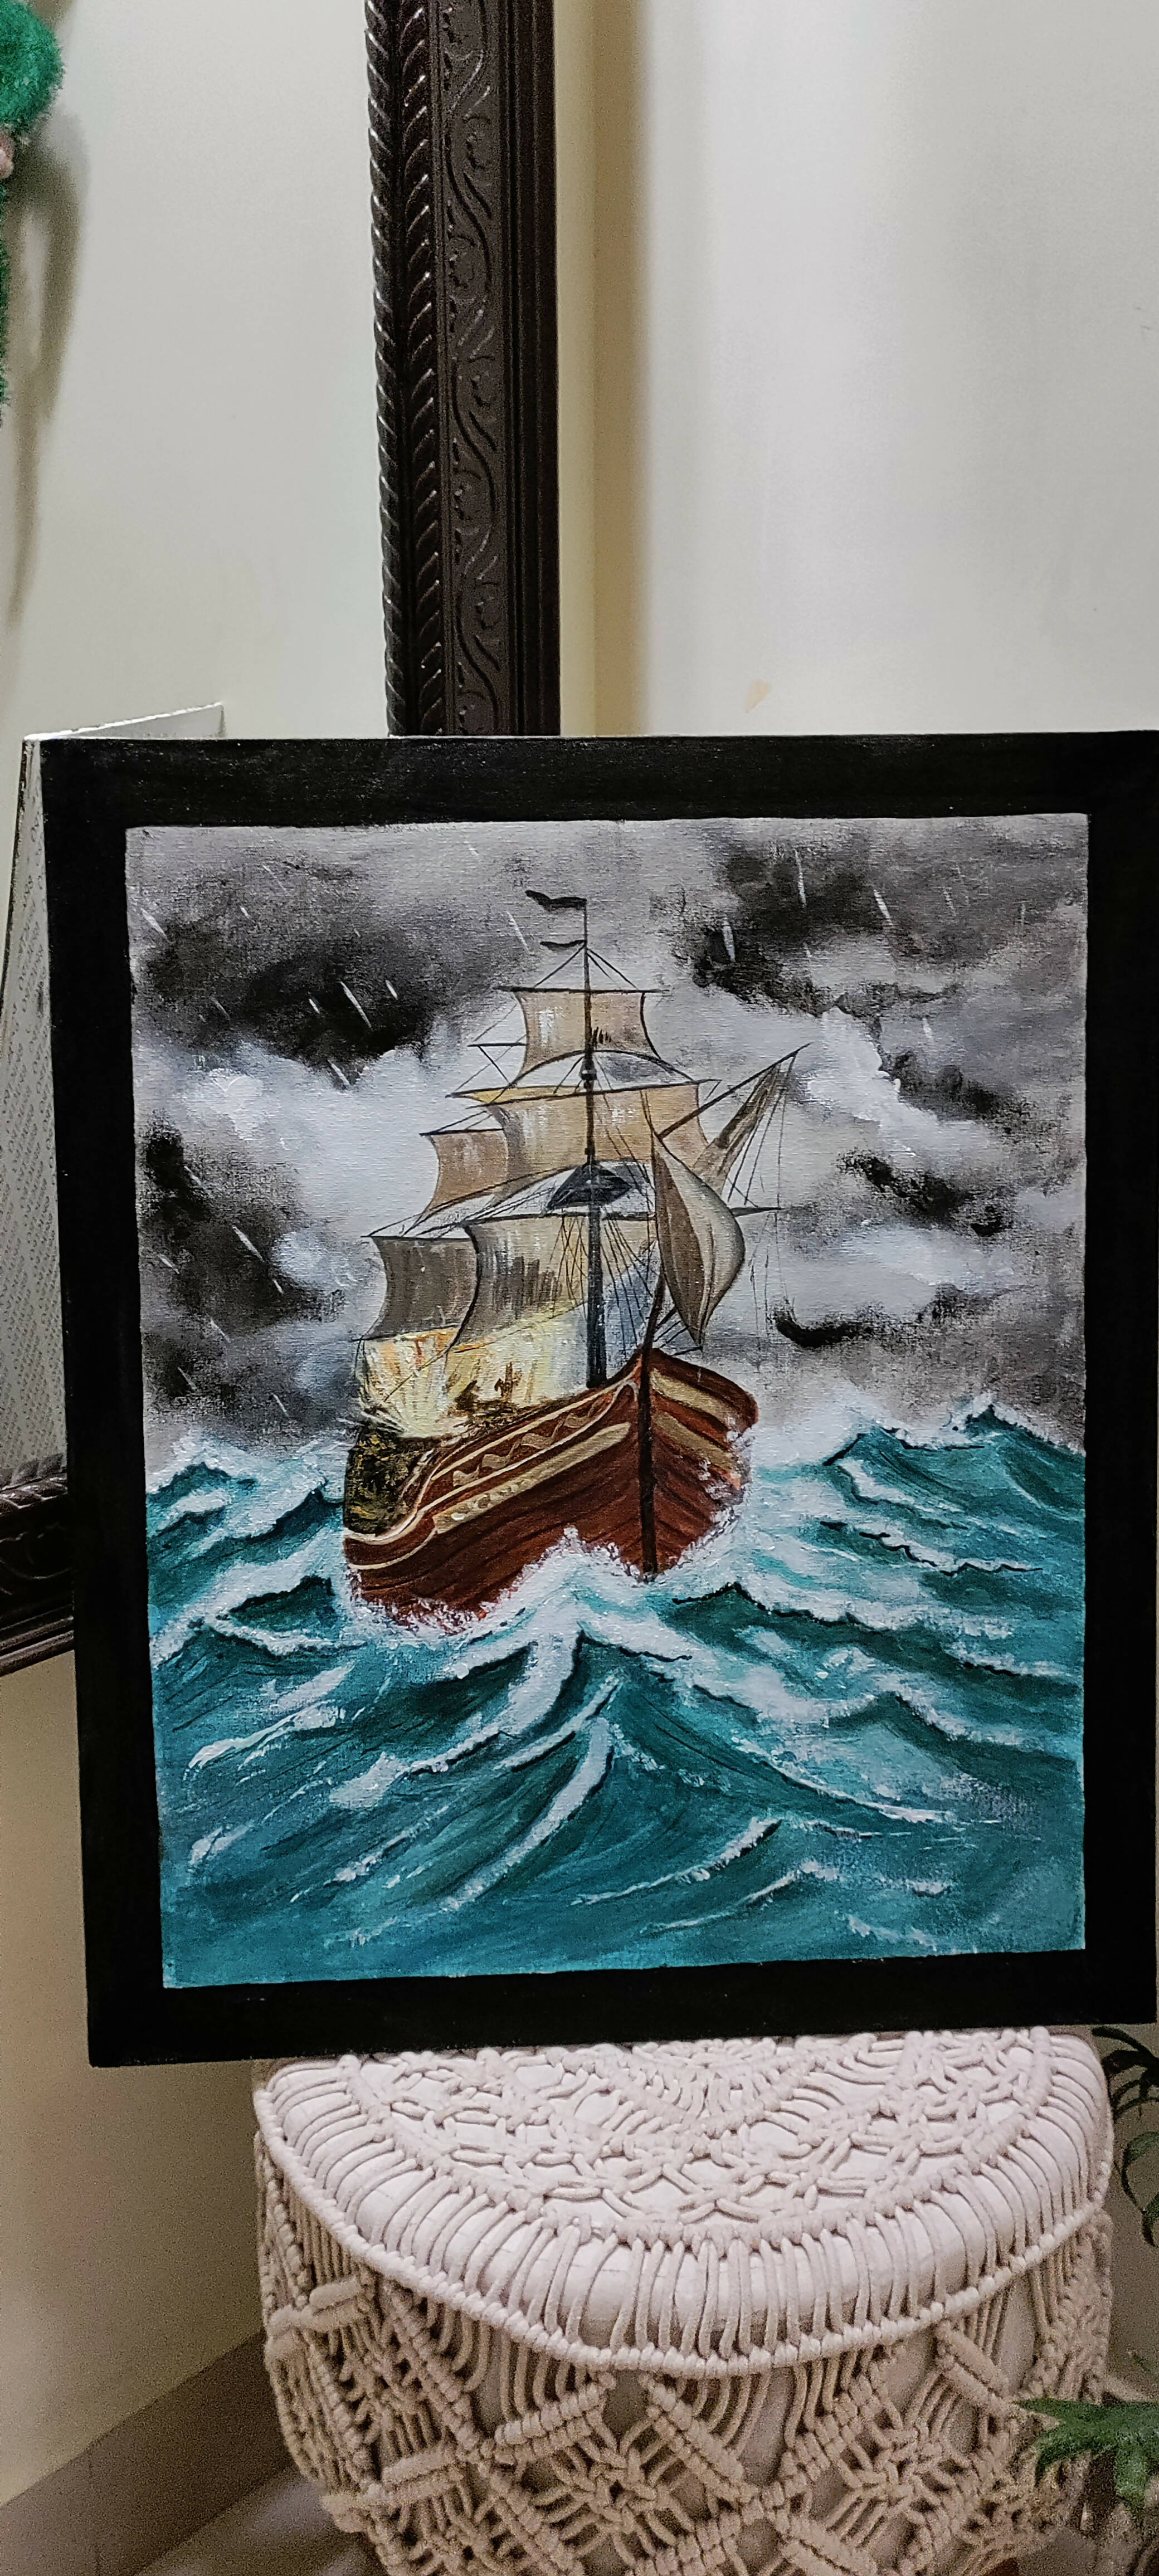 Ship in storm